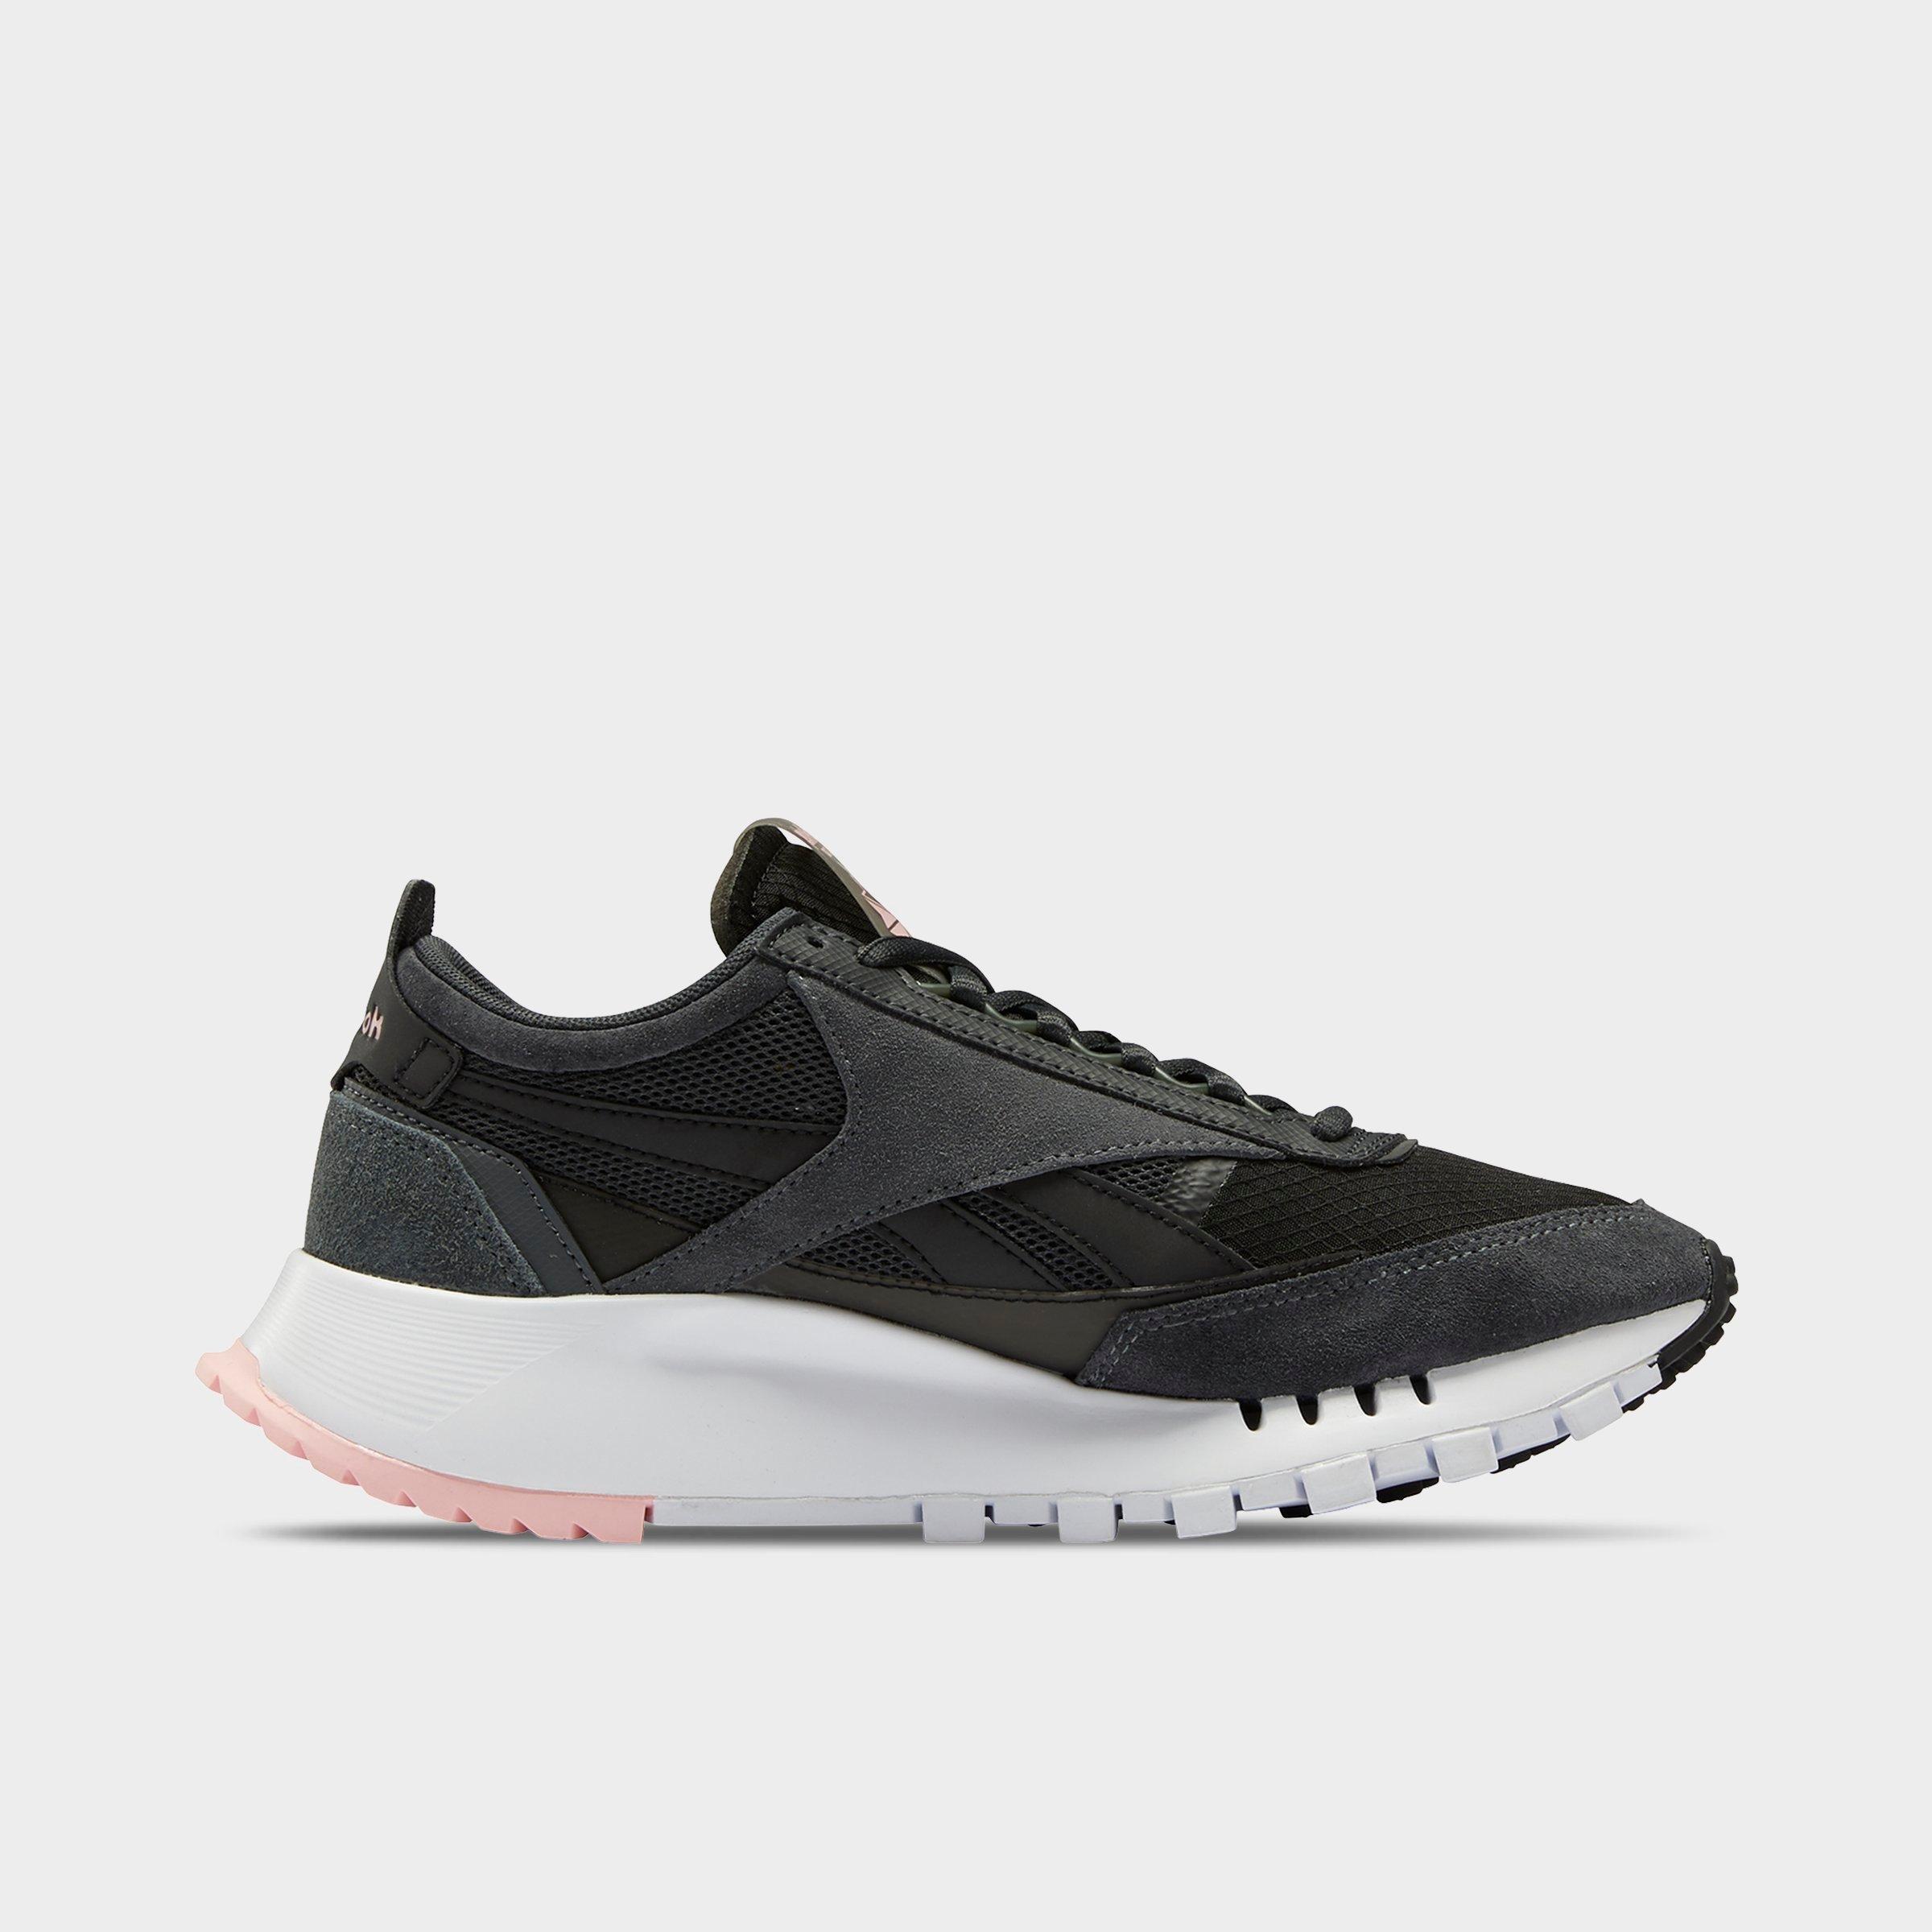 reebok women's classic leather casual sneakers from finish line